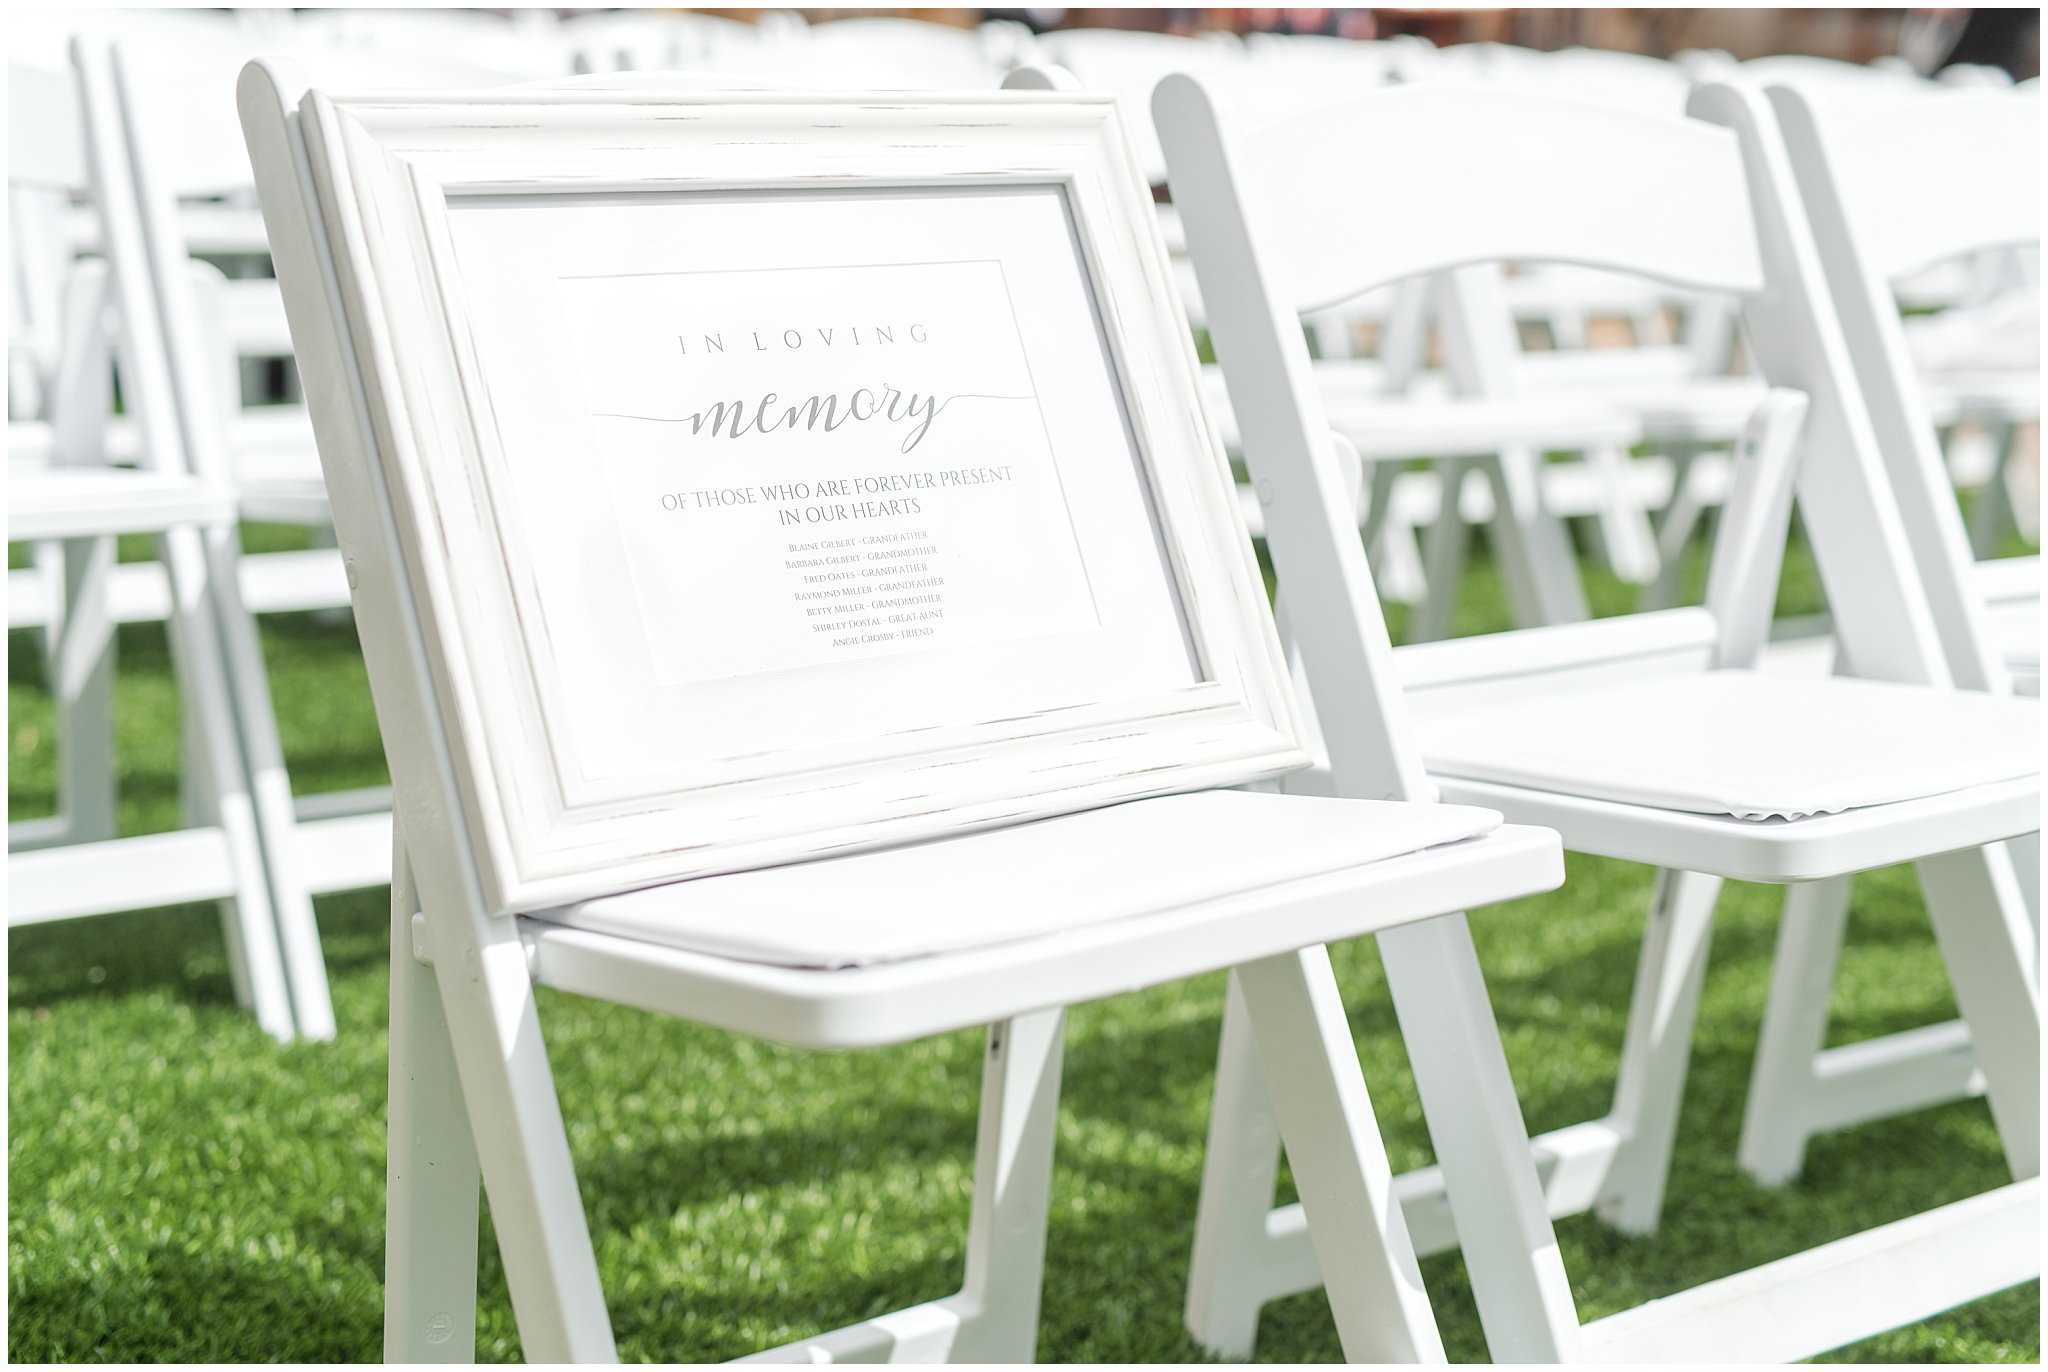 Memory chair at ceremony | Park City Wedding at the Hyatt Centric | Jessie and Dallin Photography